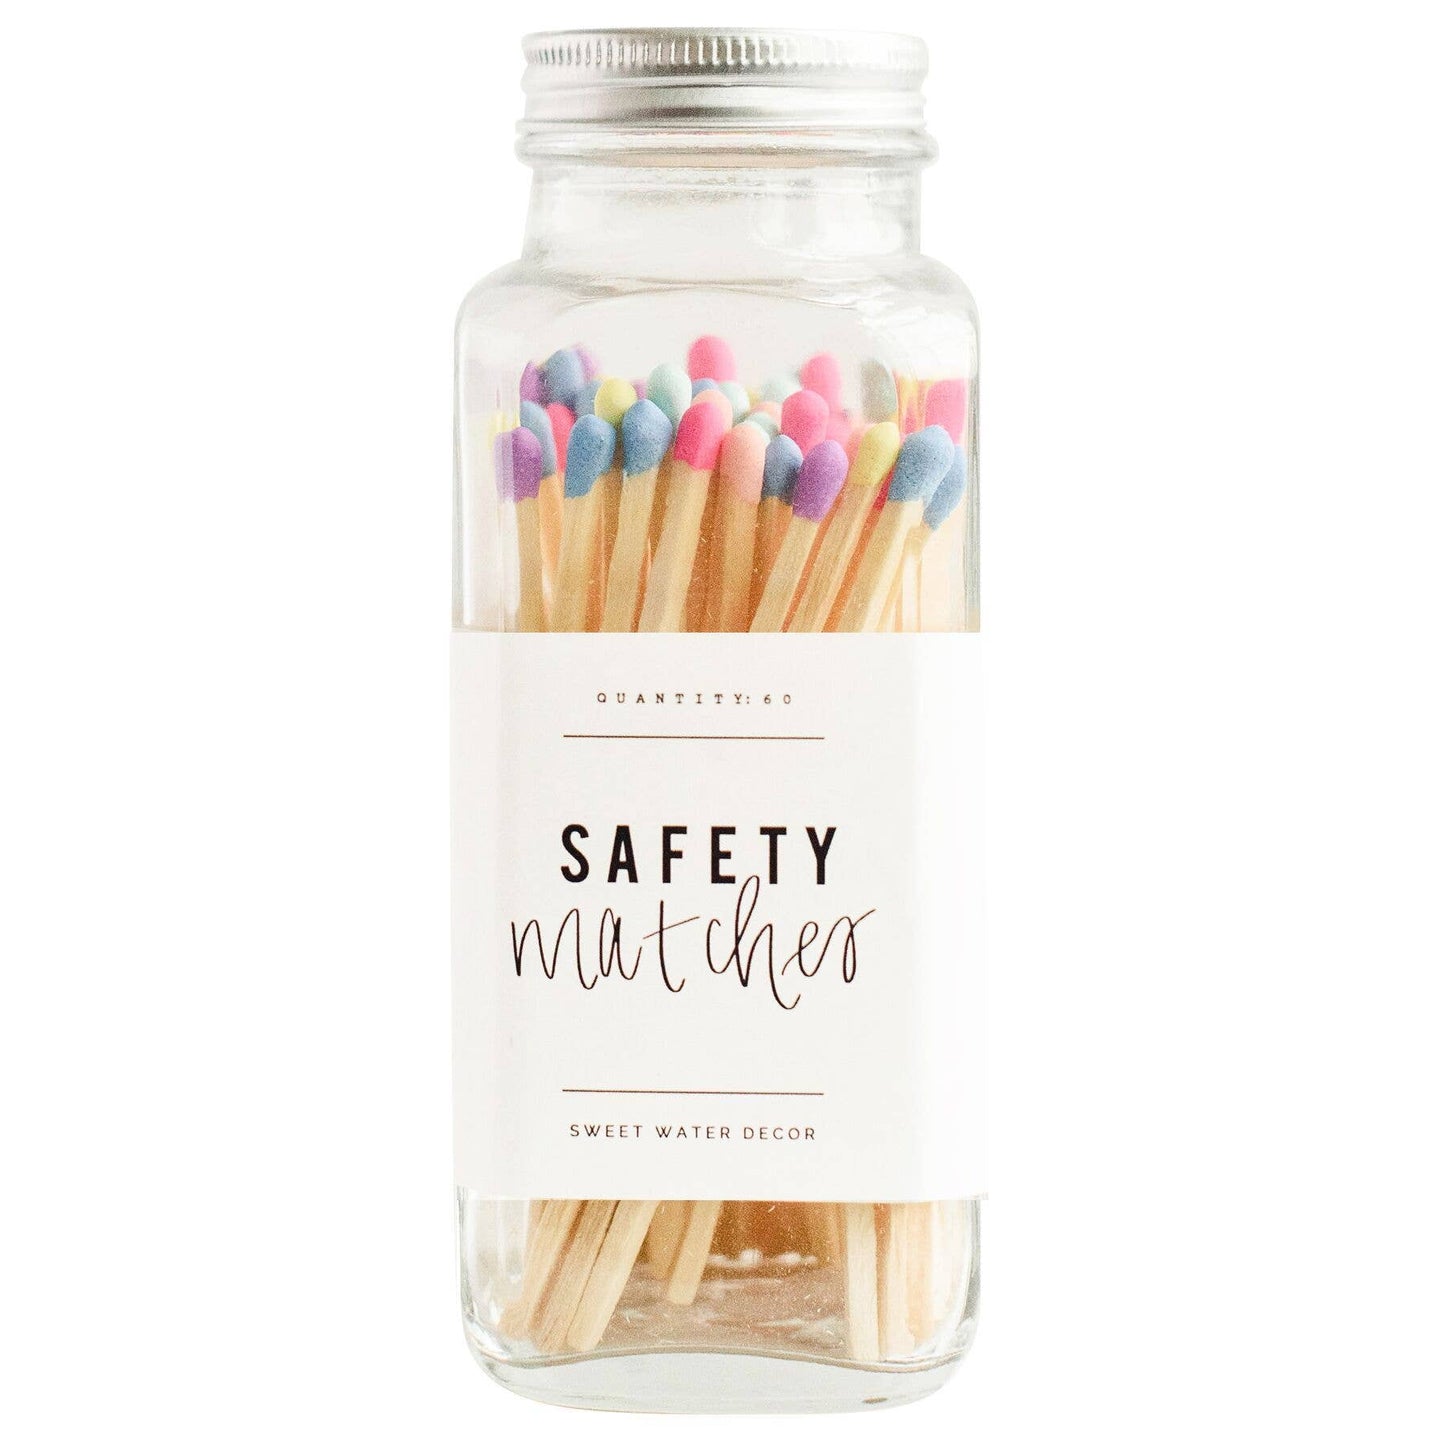 Sweet Water Decor | Safety Matches - Multicolor Rainbow Tip / Silver Lid